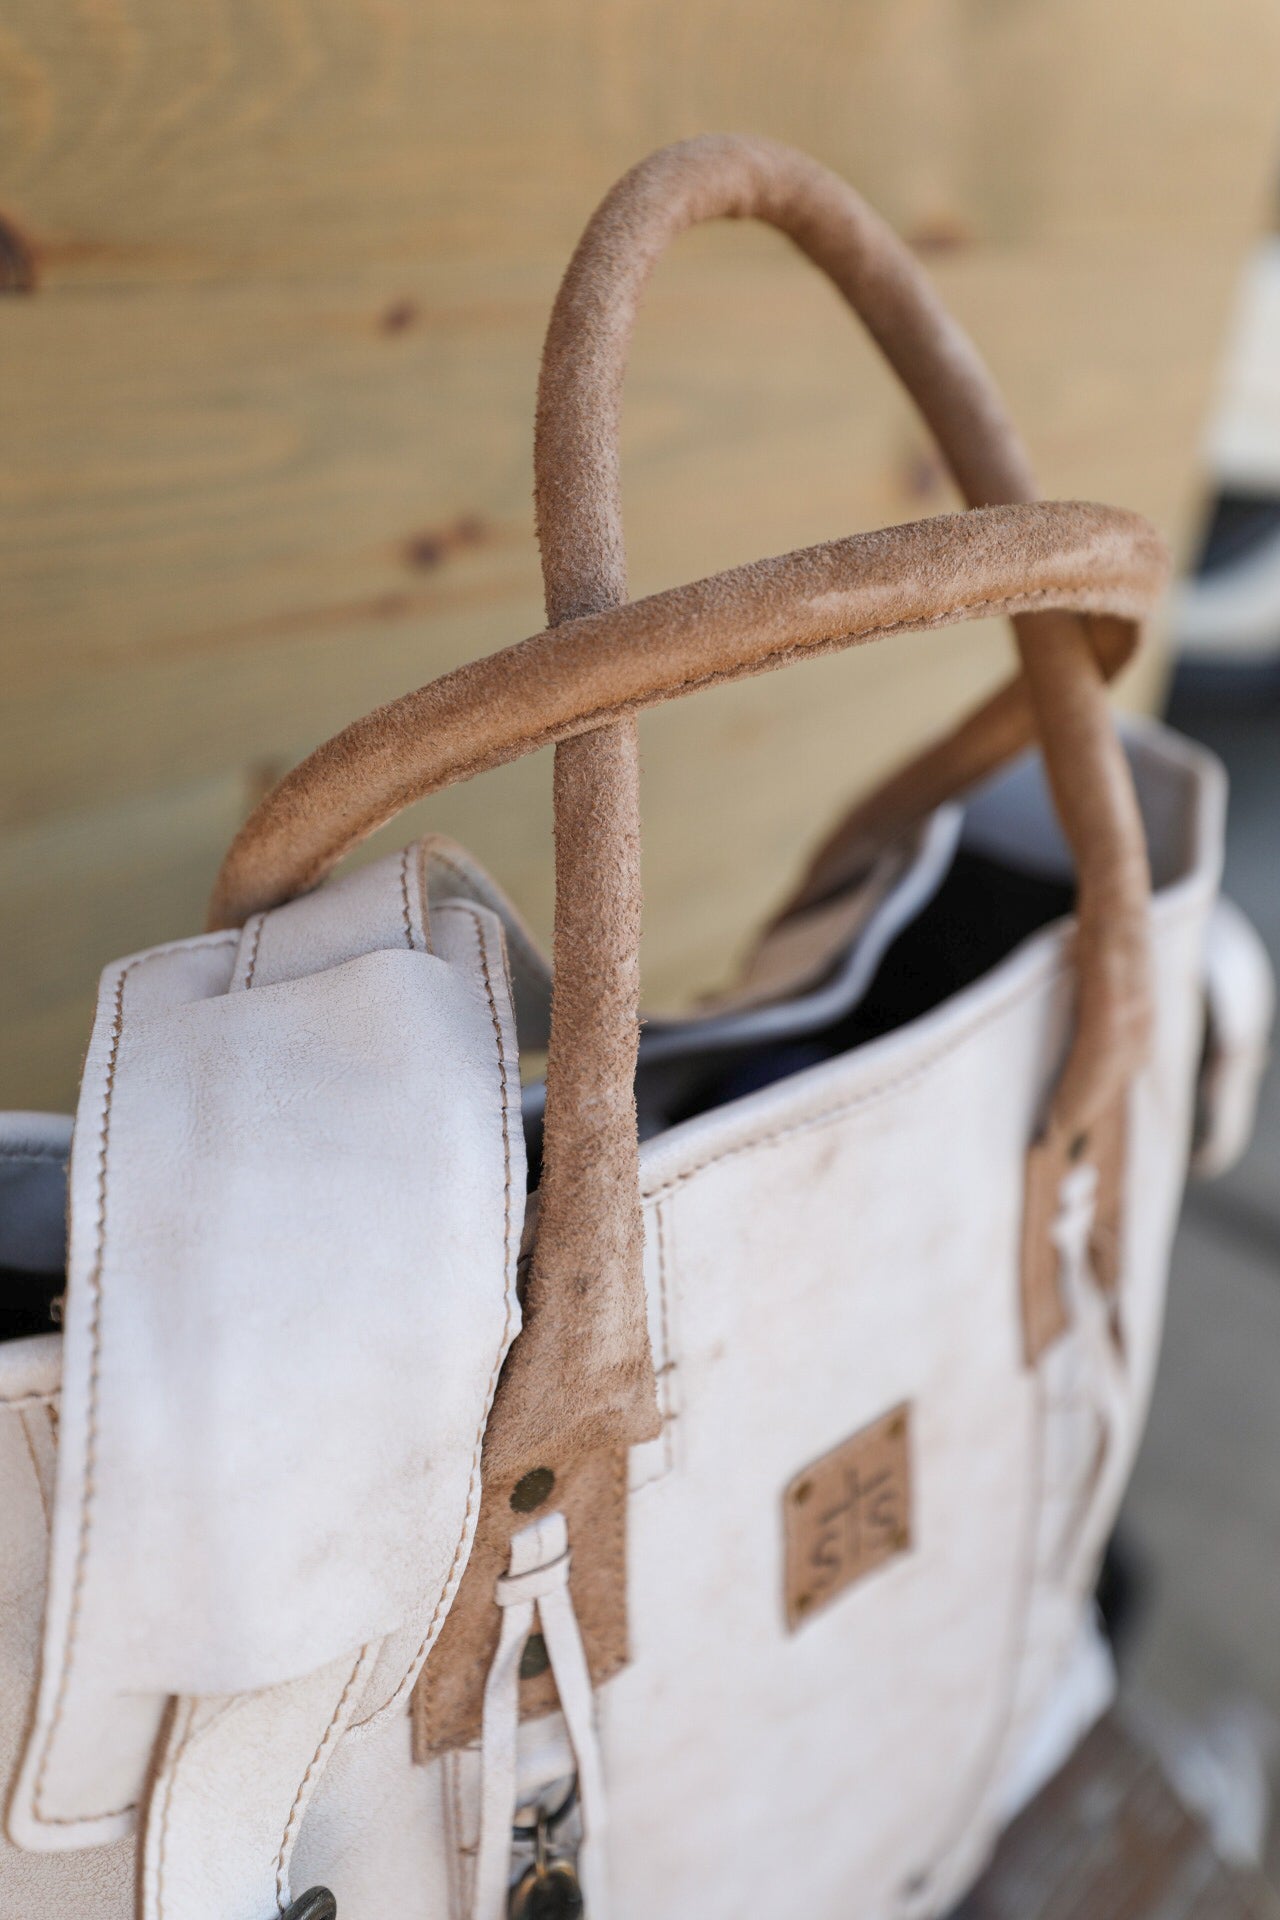 Cremello All In Tote-Purses/Bags-Crooked Horn Company, Online Women's Fashion Boutique in San Tan Valley, Arizona 85140